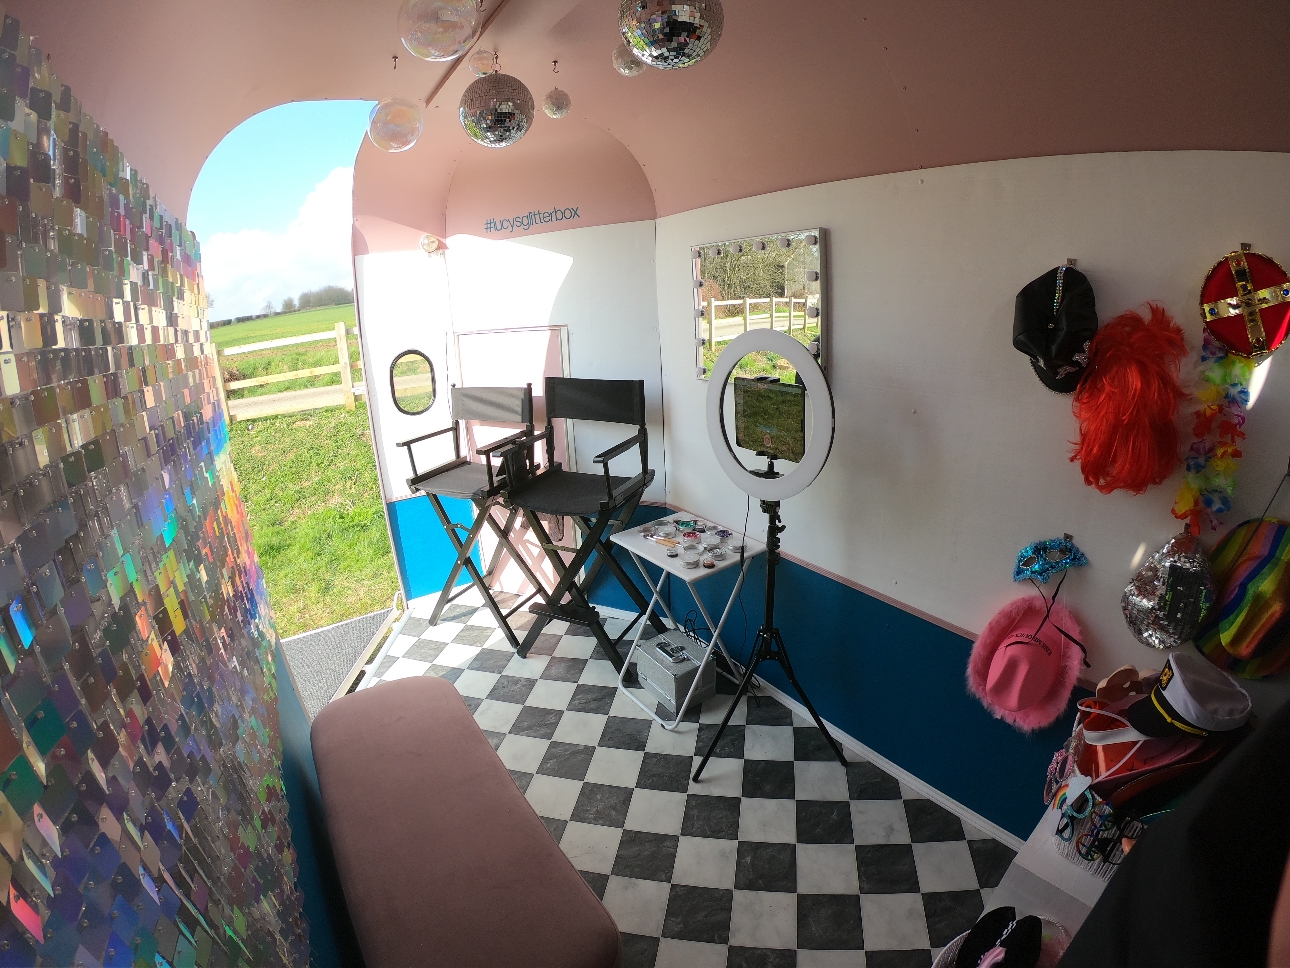 interior of horse box black and white floor pink walls props and make up chairs